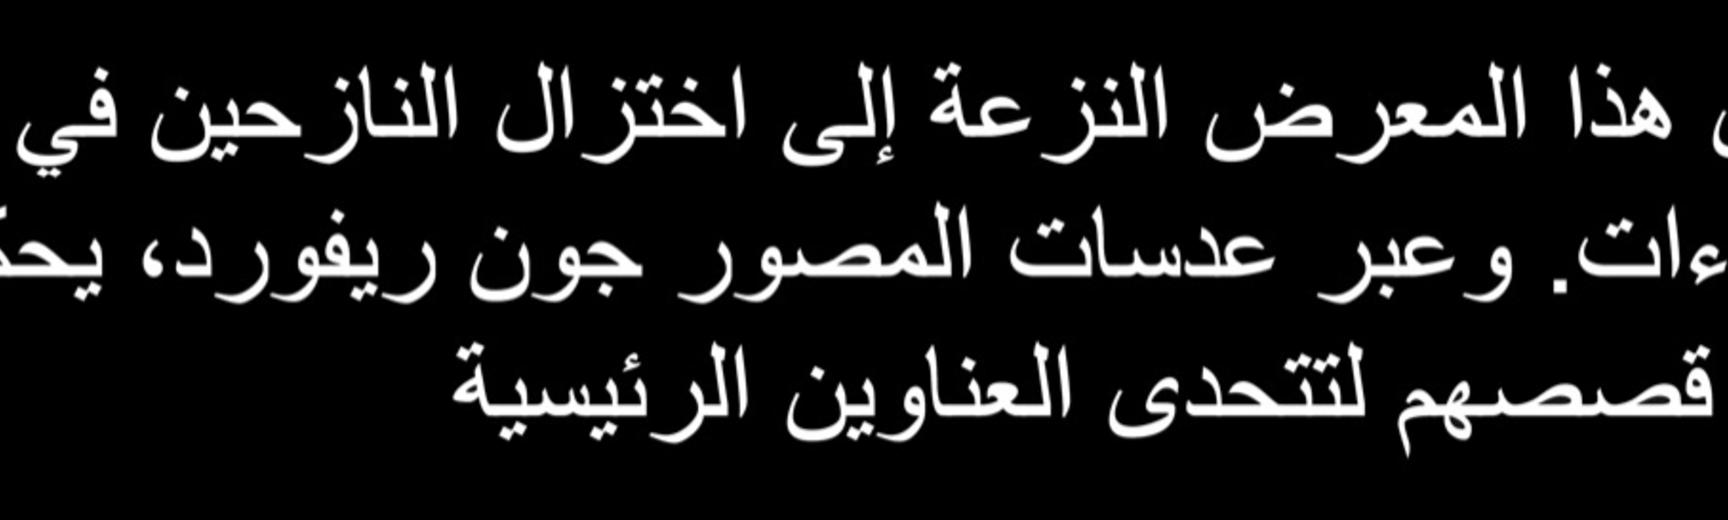 Black and white Arabic text